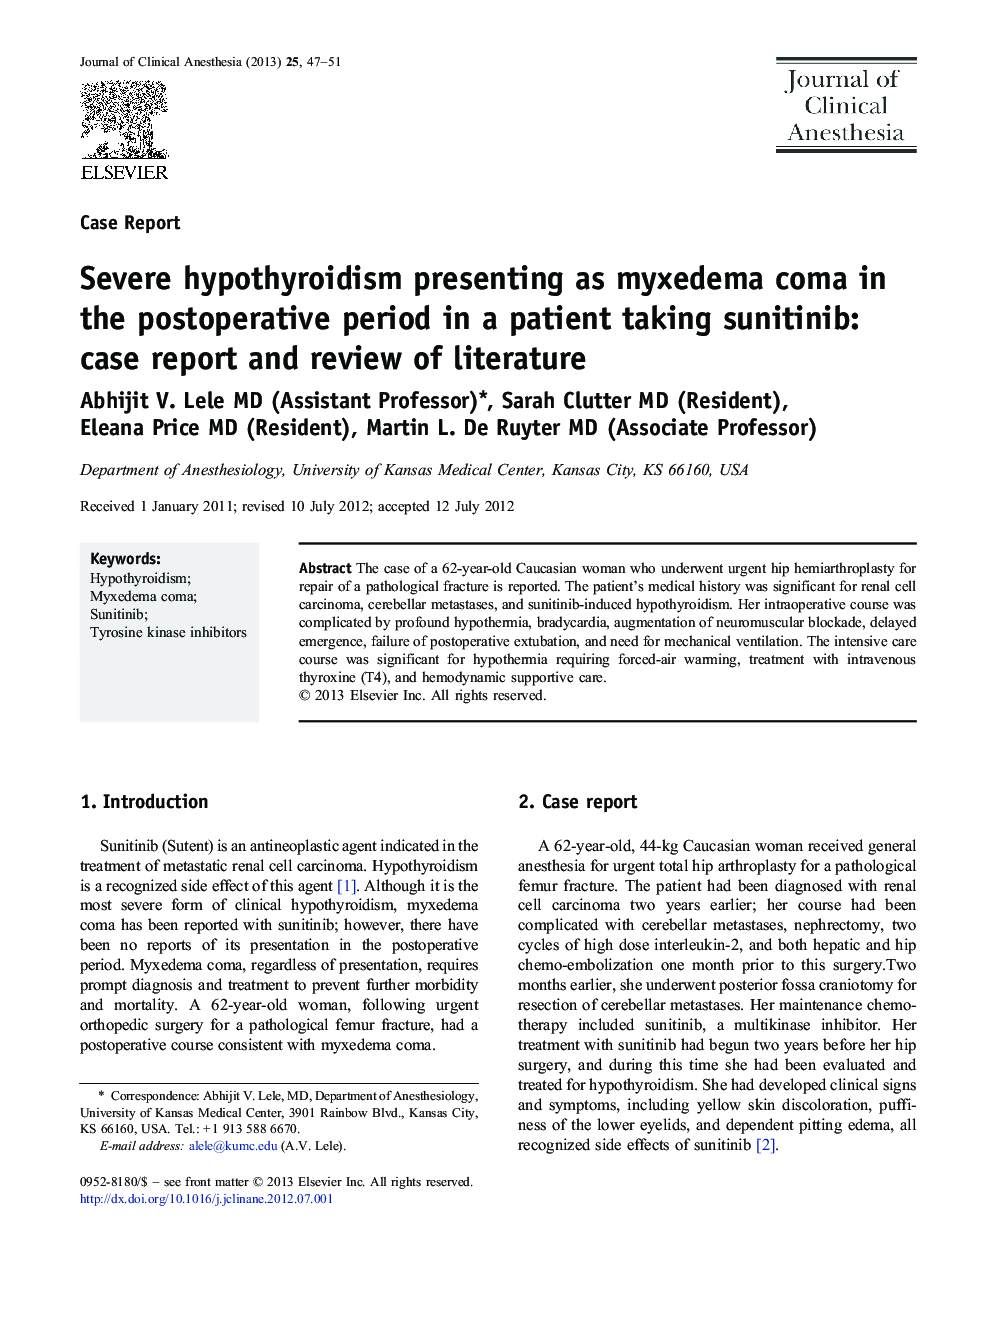 Severe hypothyroidism presenting as myxedema coma in the postoperative period in a patient taking sunitinib: case report and review of literature